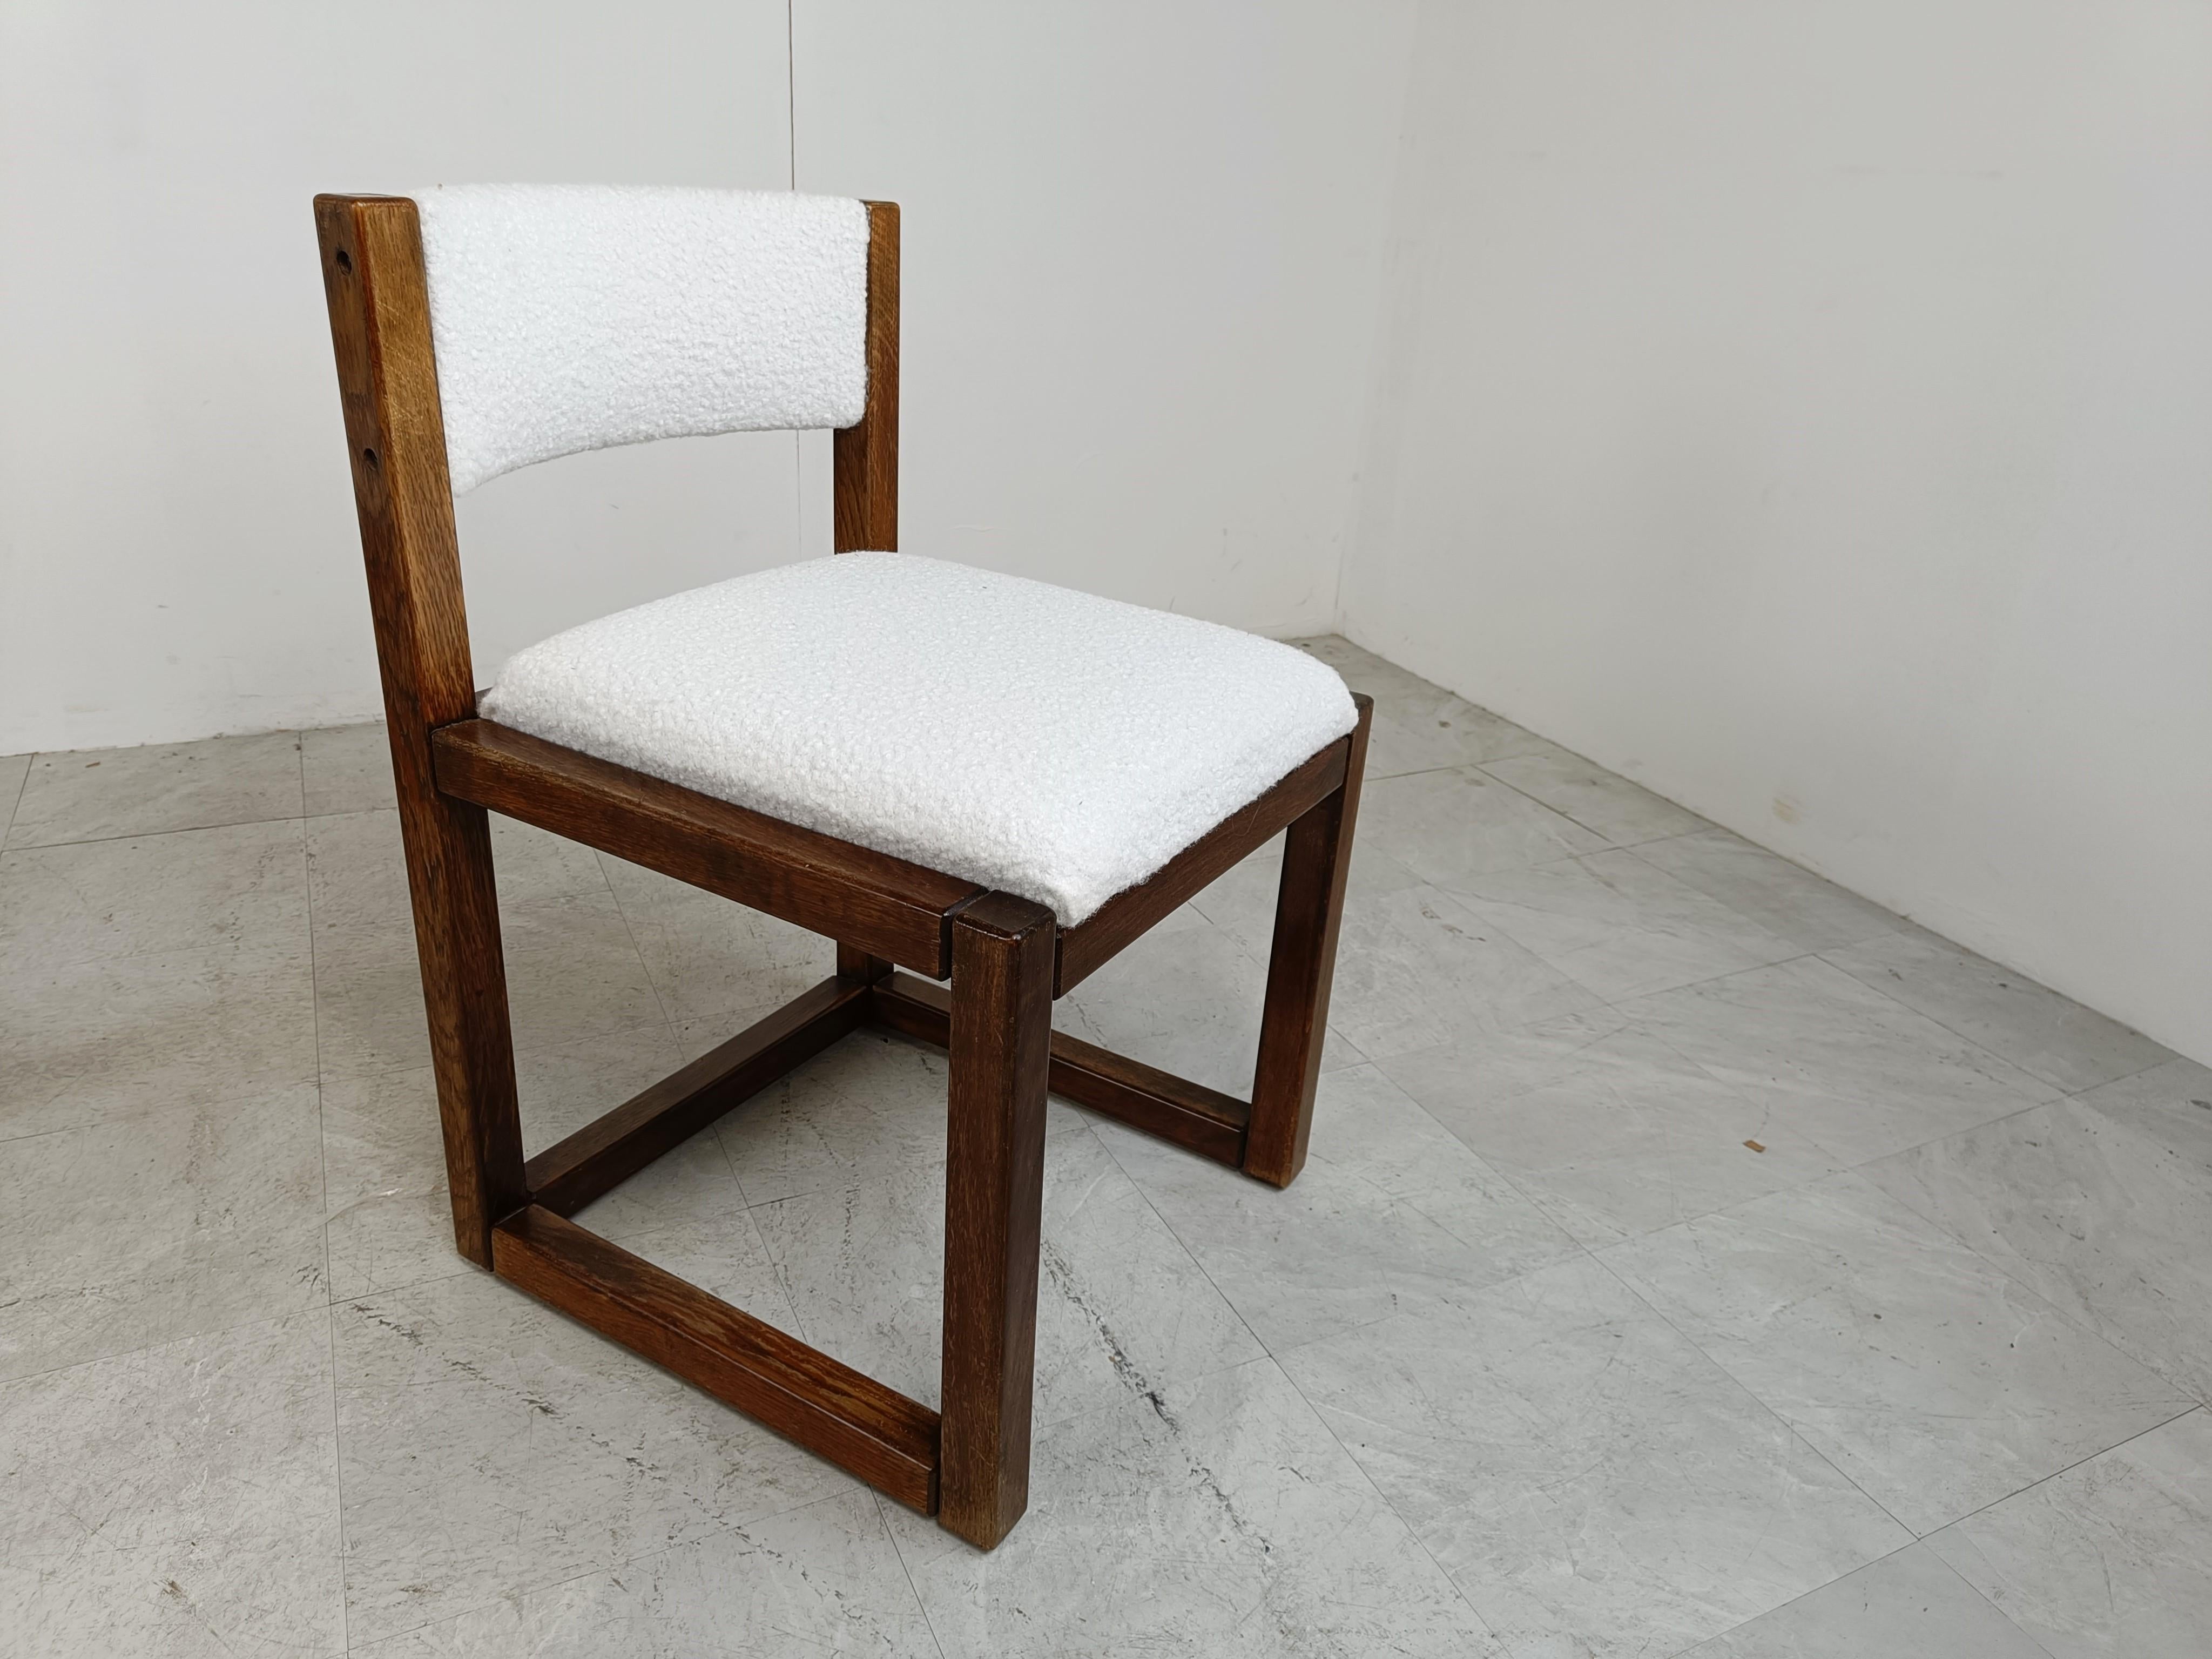 Brutalist stained oak dining chairs with newly upholstered bouclé fabric.

These very sturdy structures have some beautiful natural wood veining which, combined with the white bouclé fabric looks very good.

1960s - Germany

Very good